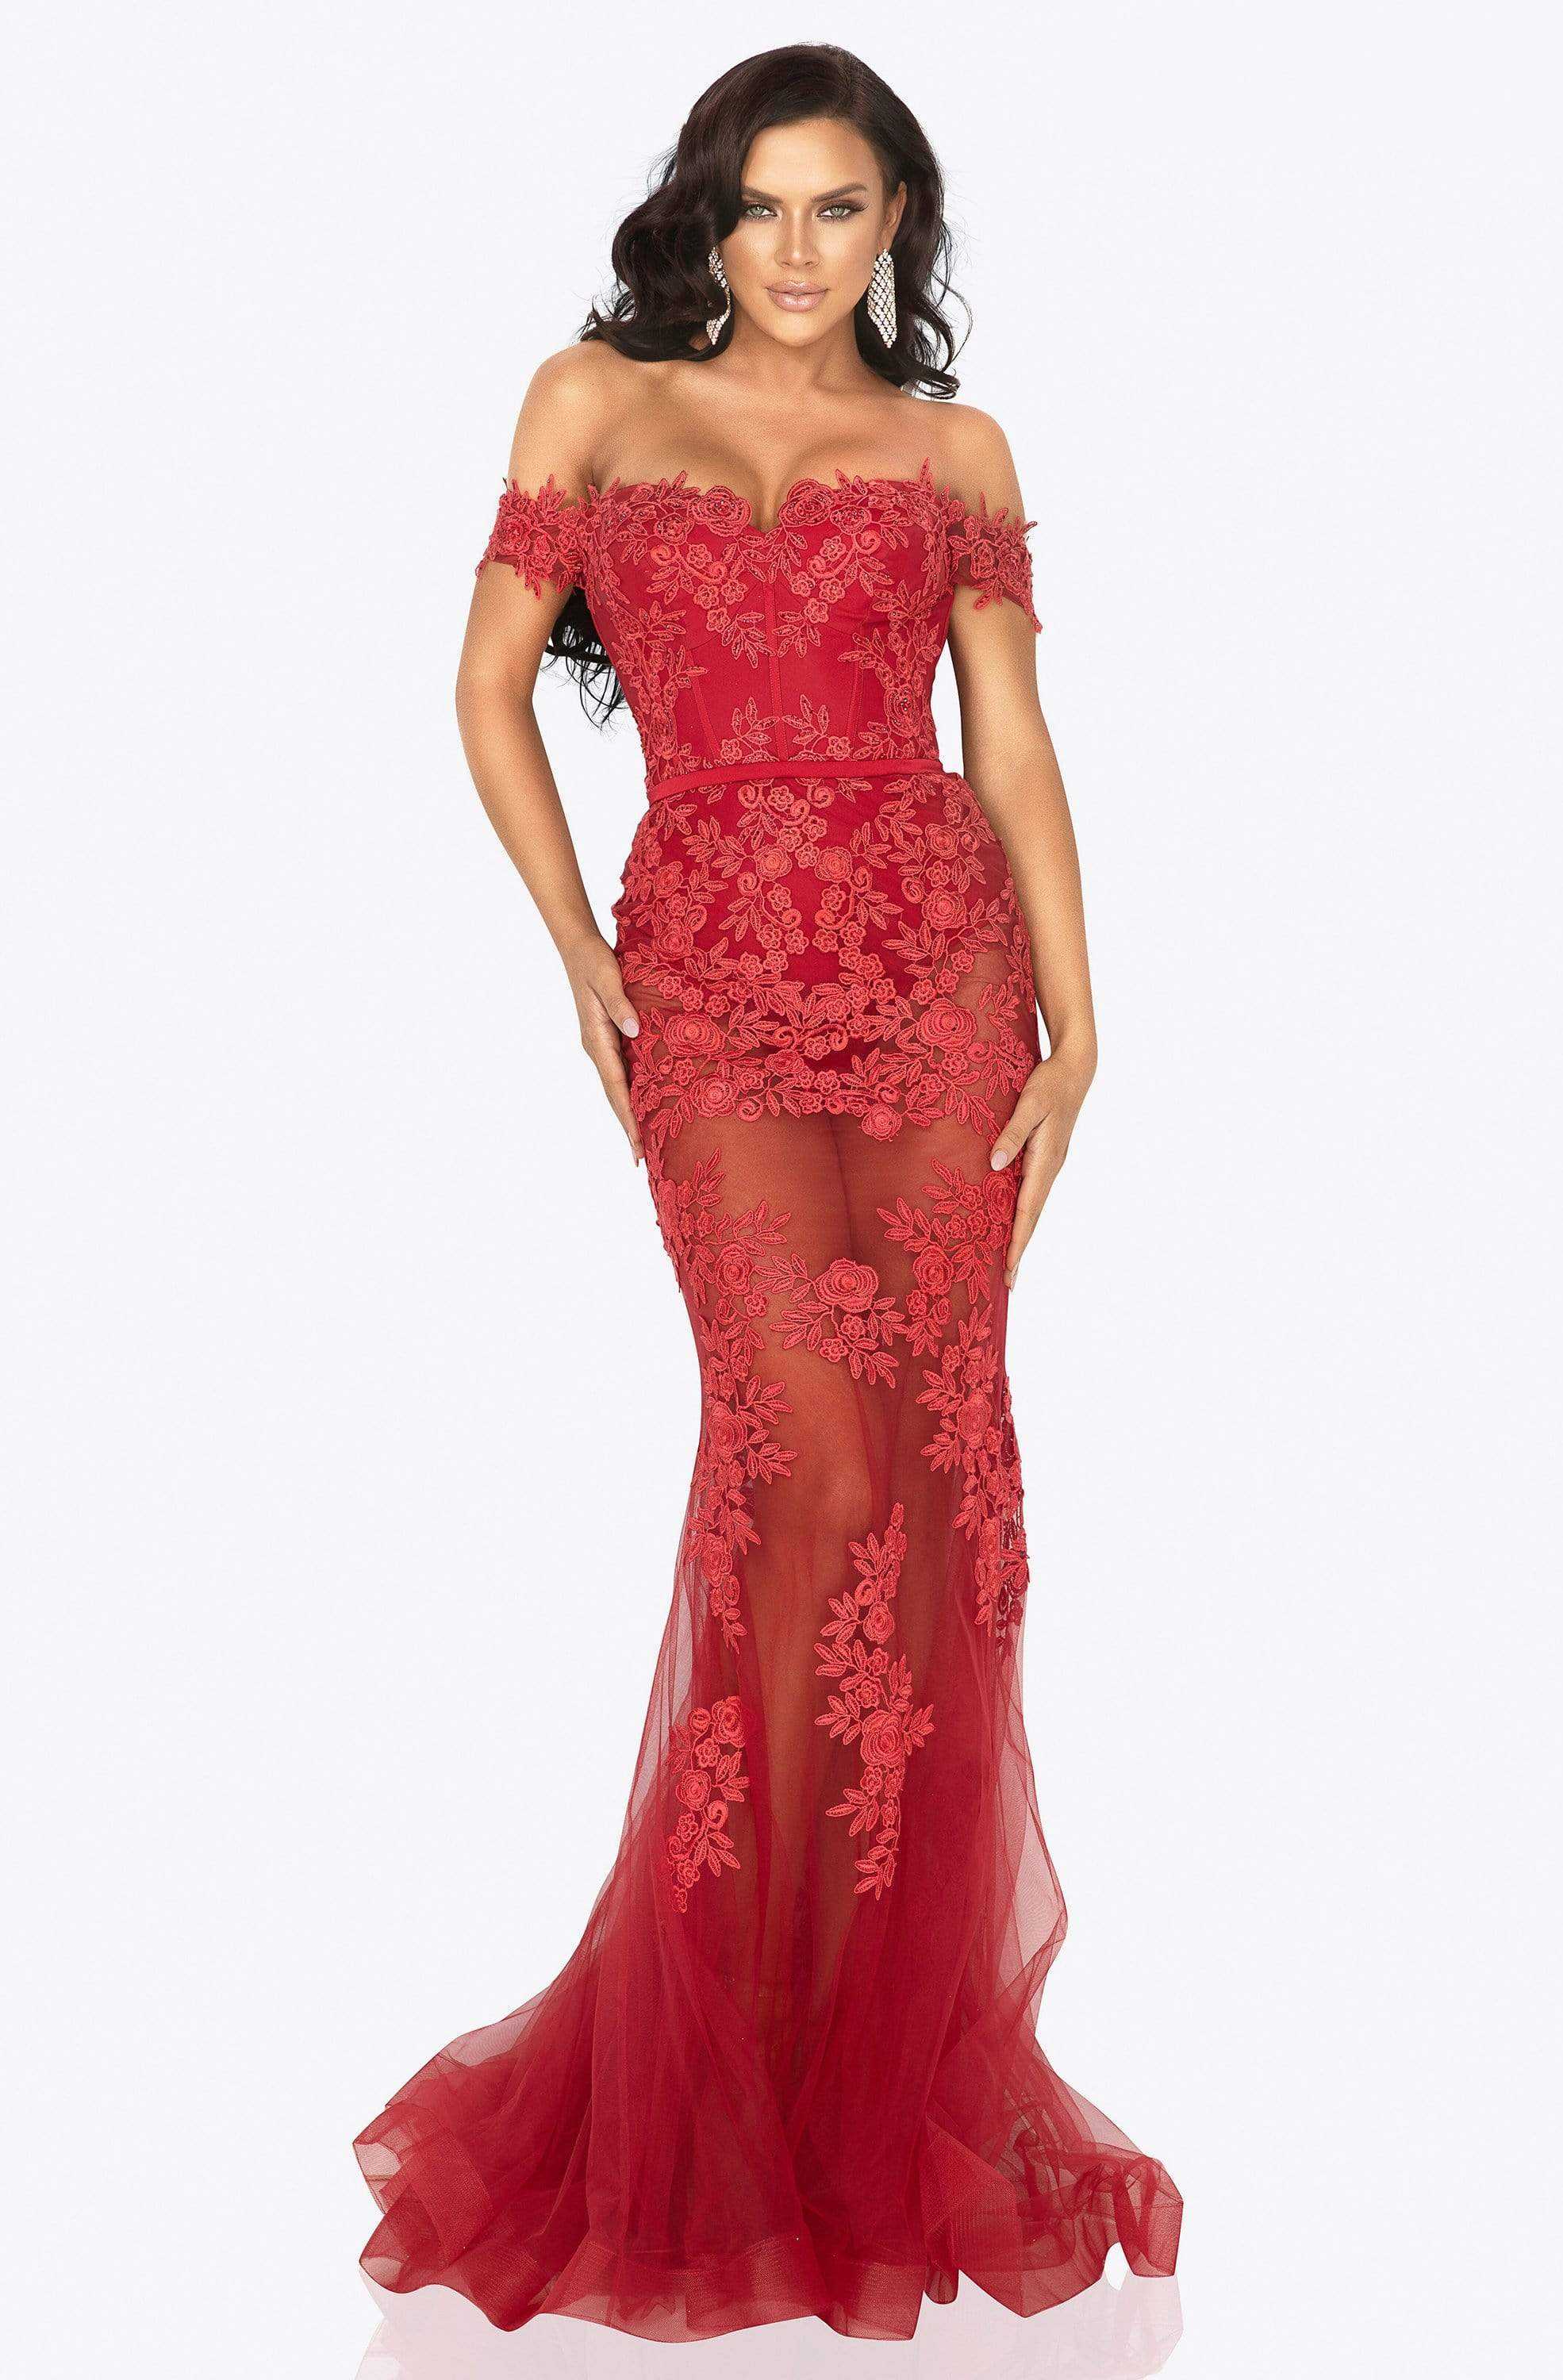 Terani Couture, Terani Couture - 2012P1471 Floral Embroidered Off-Shoulder Dress